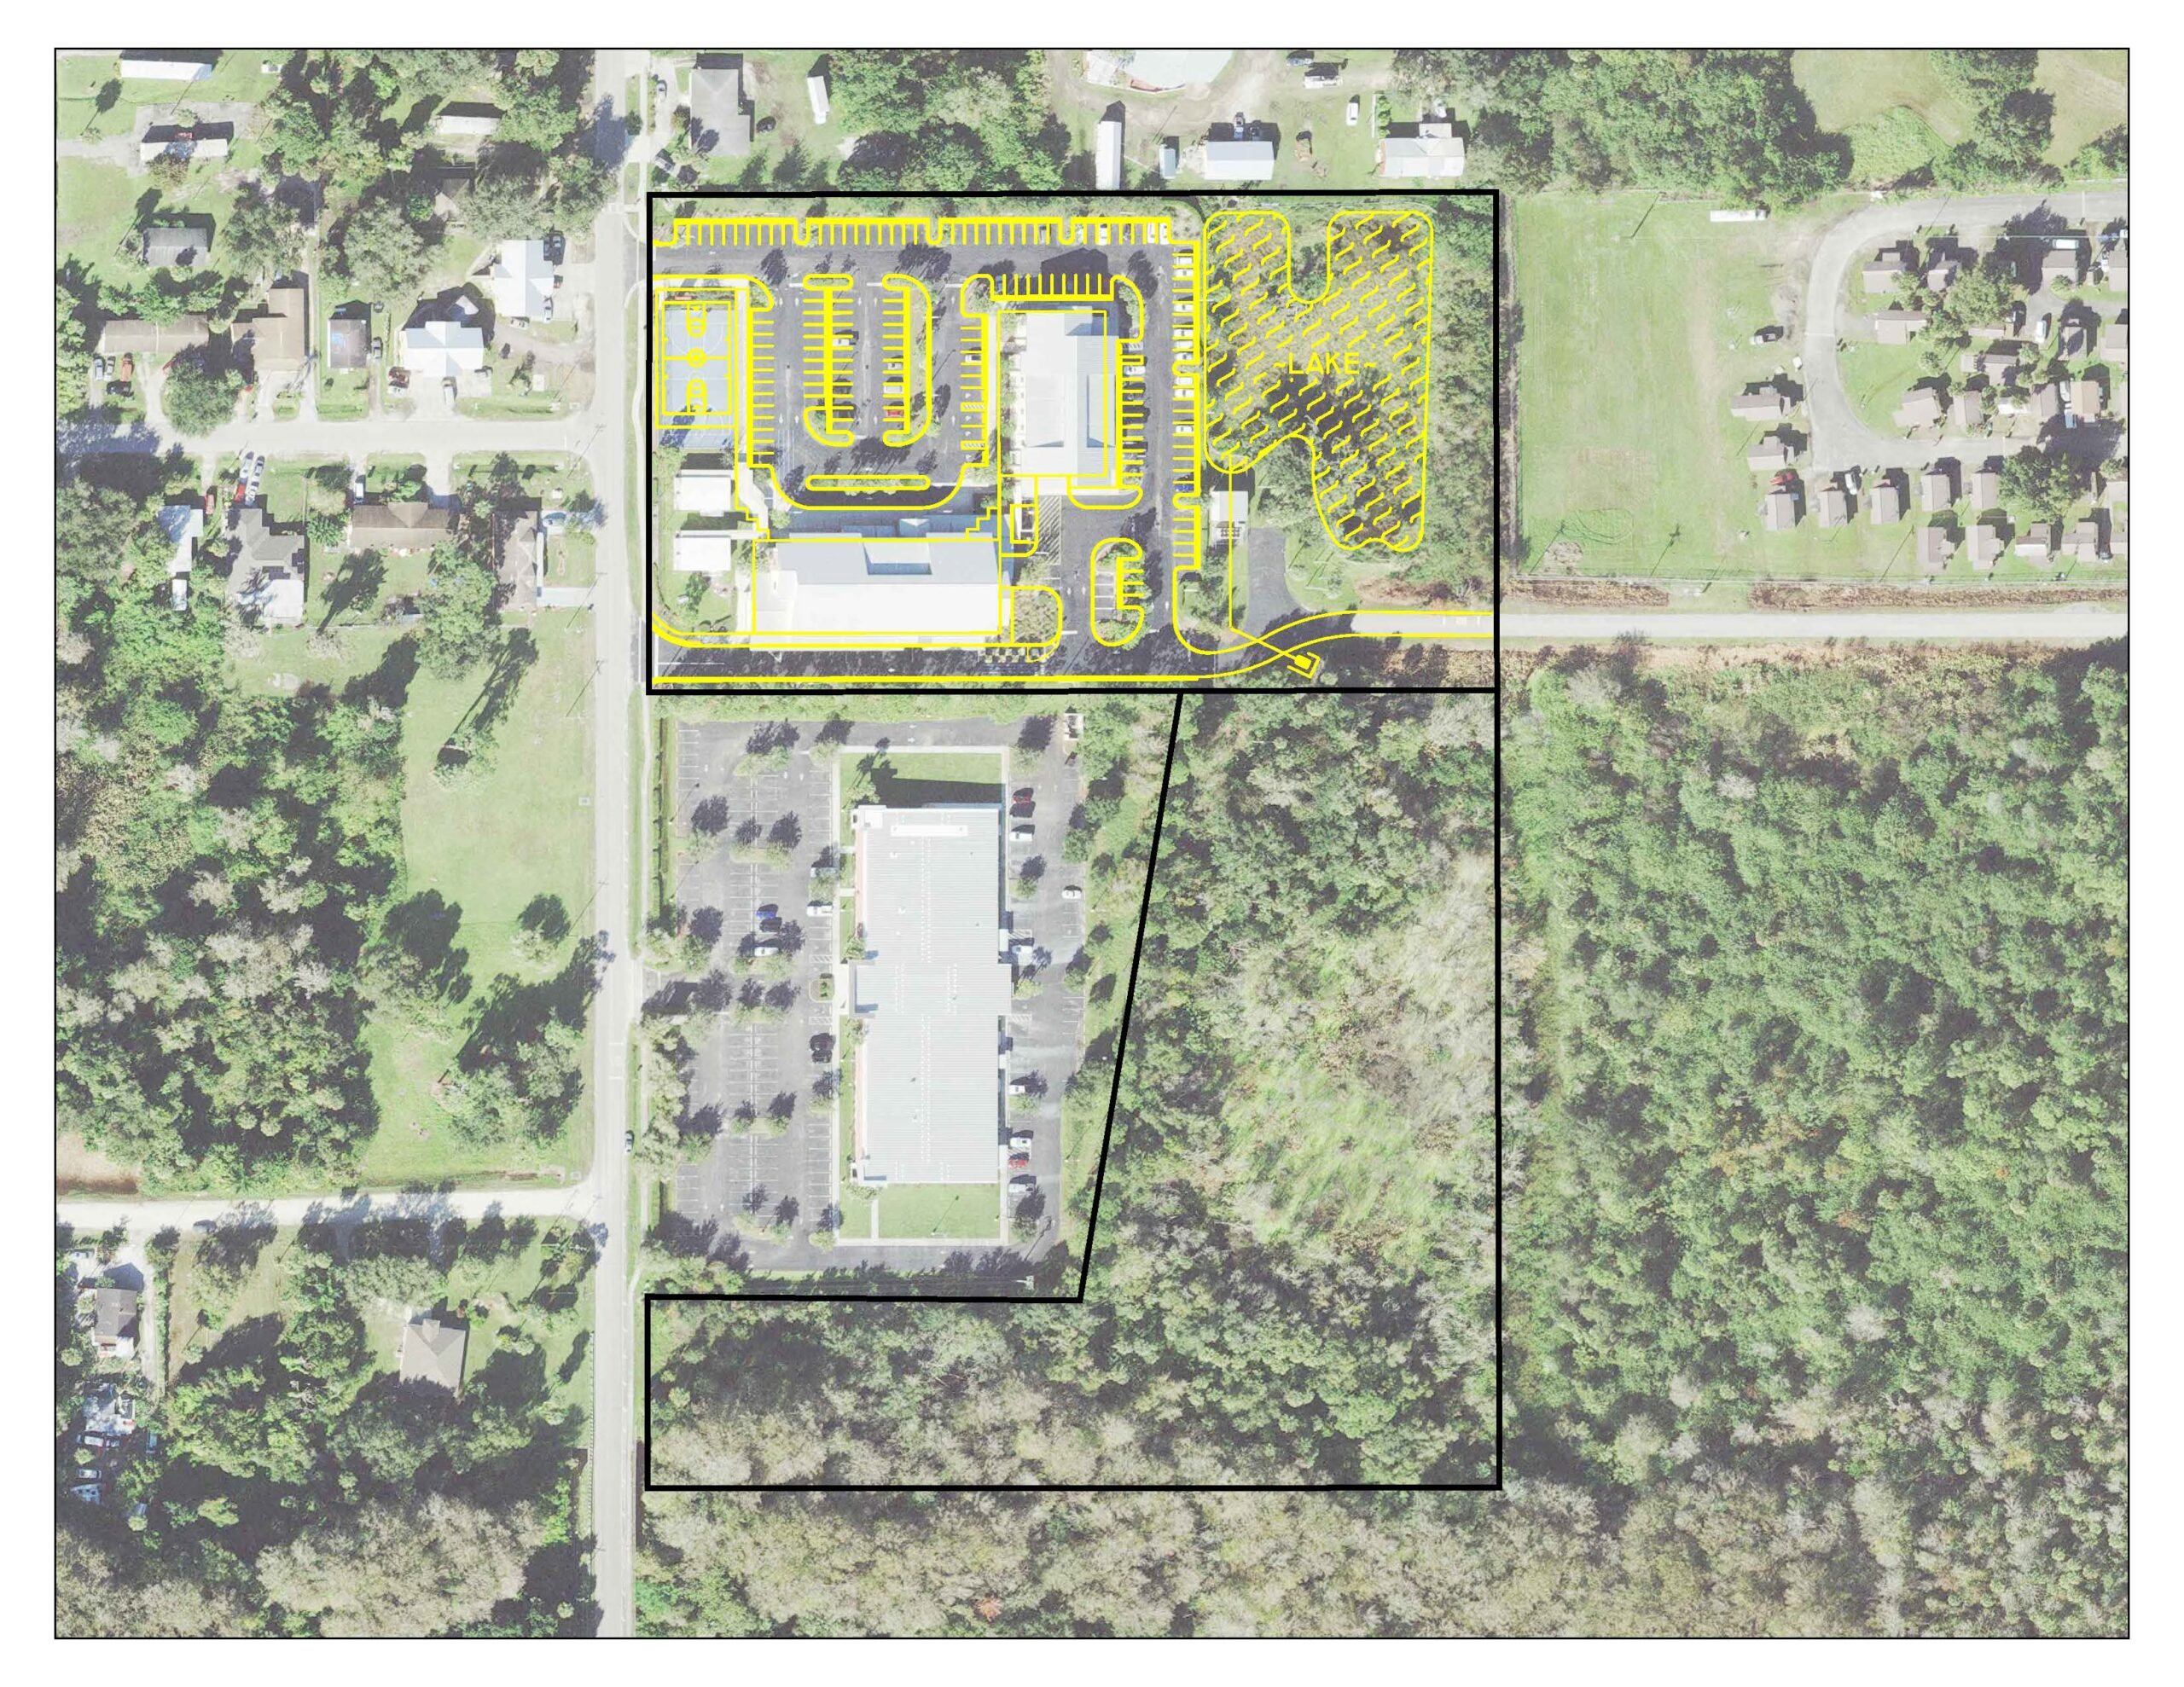 Bethune Education Center – Aerial wtih Site Plan